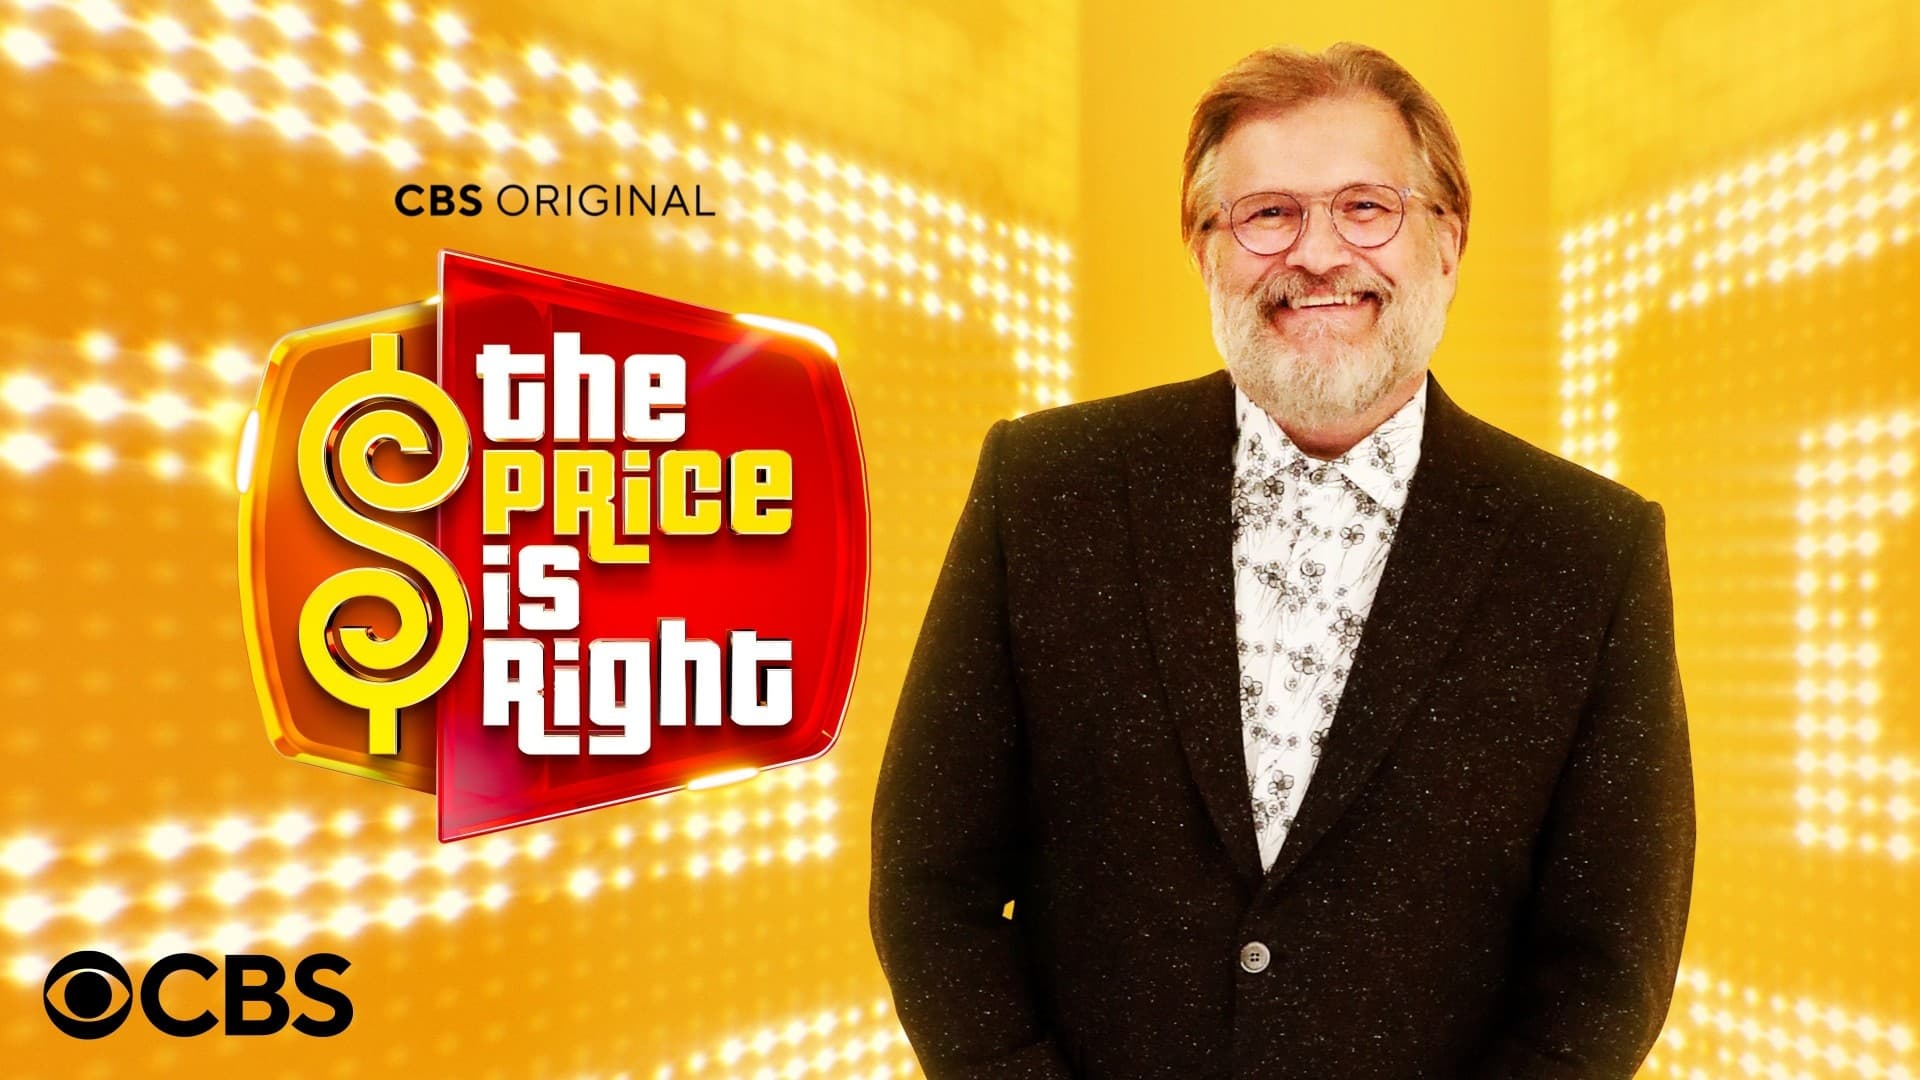 The Price Is Right - Season 1 Episode 201 : The Price Is Right Season 1 Episode 201